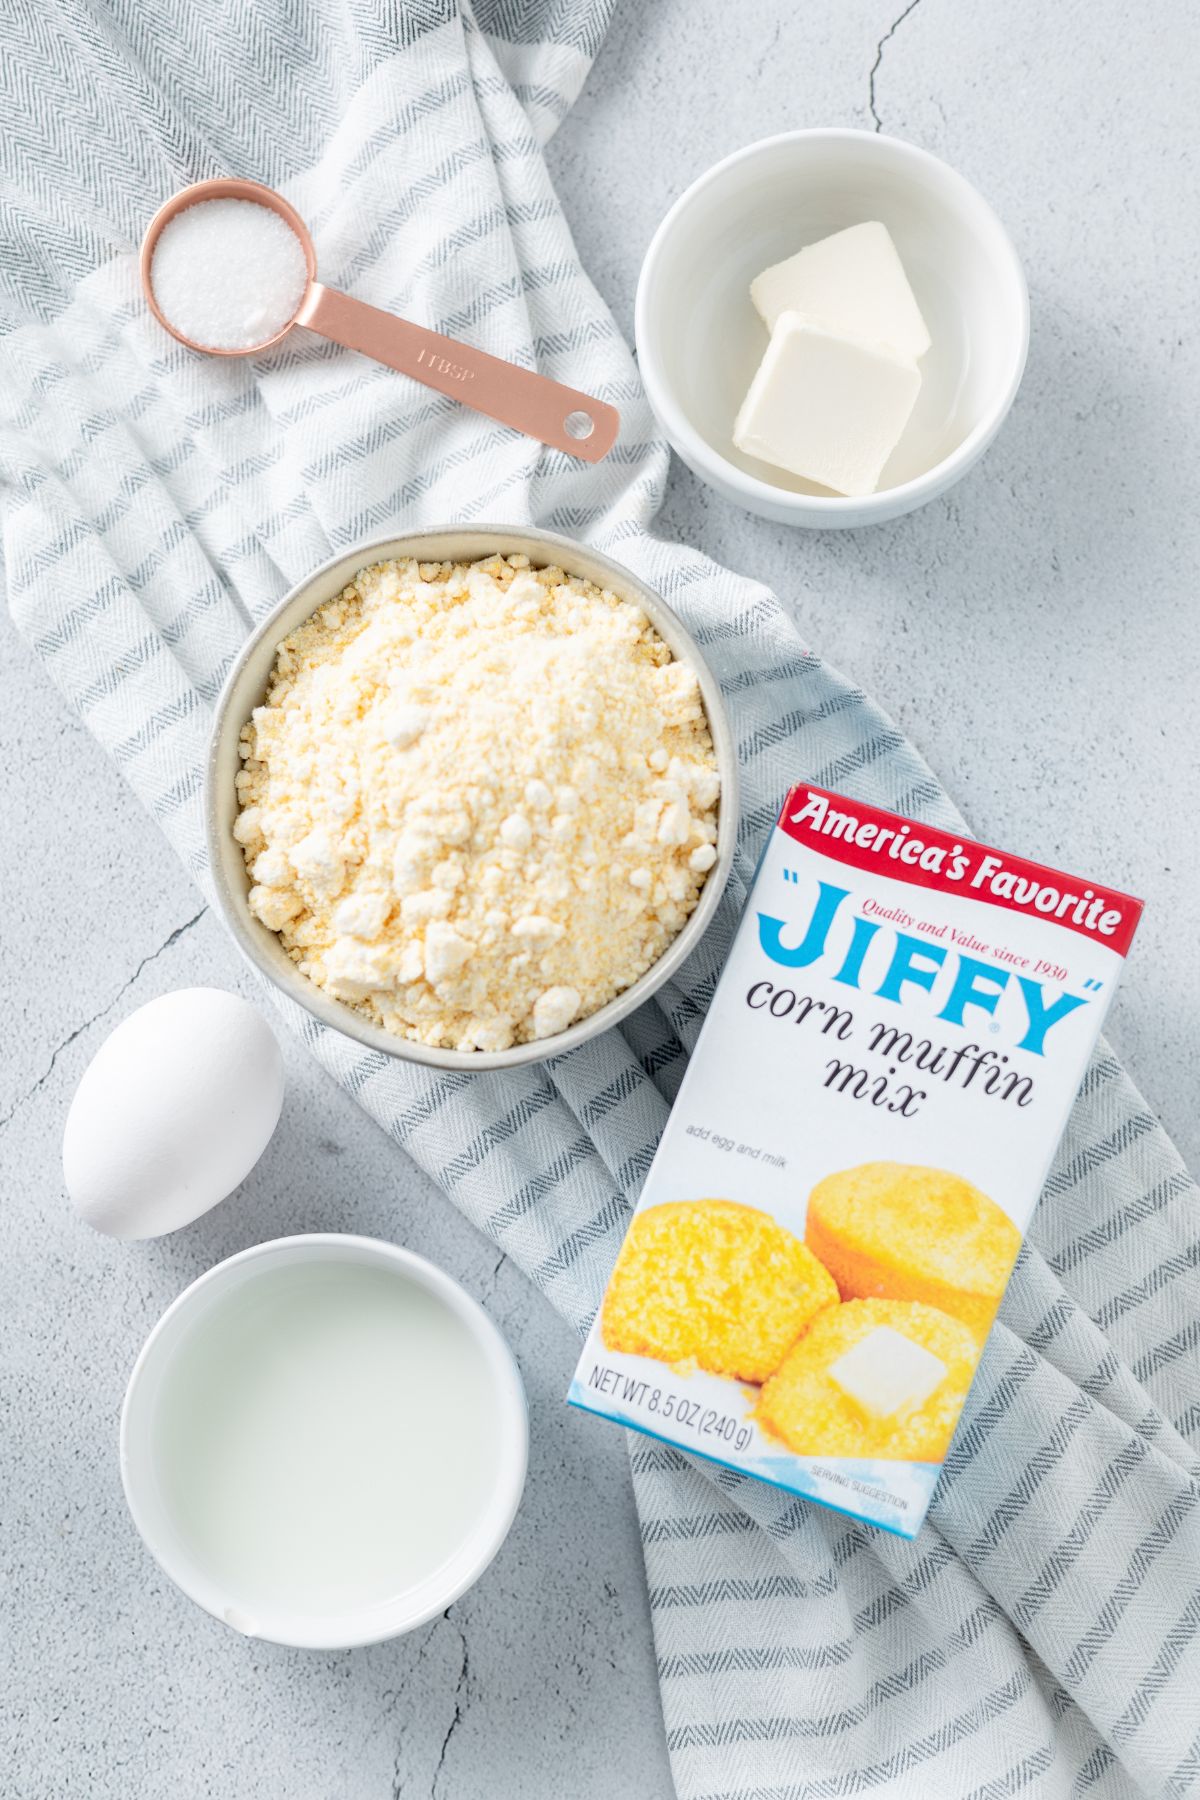 Jiffy corn muffin mix. sugar, Large egg, Milk, melted Butter, Oil spray on separate bowls